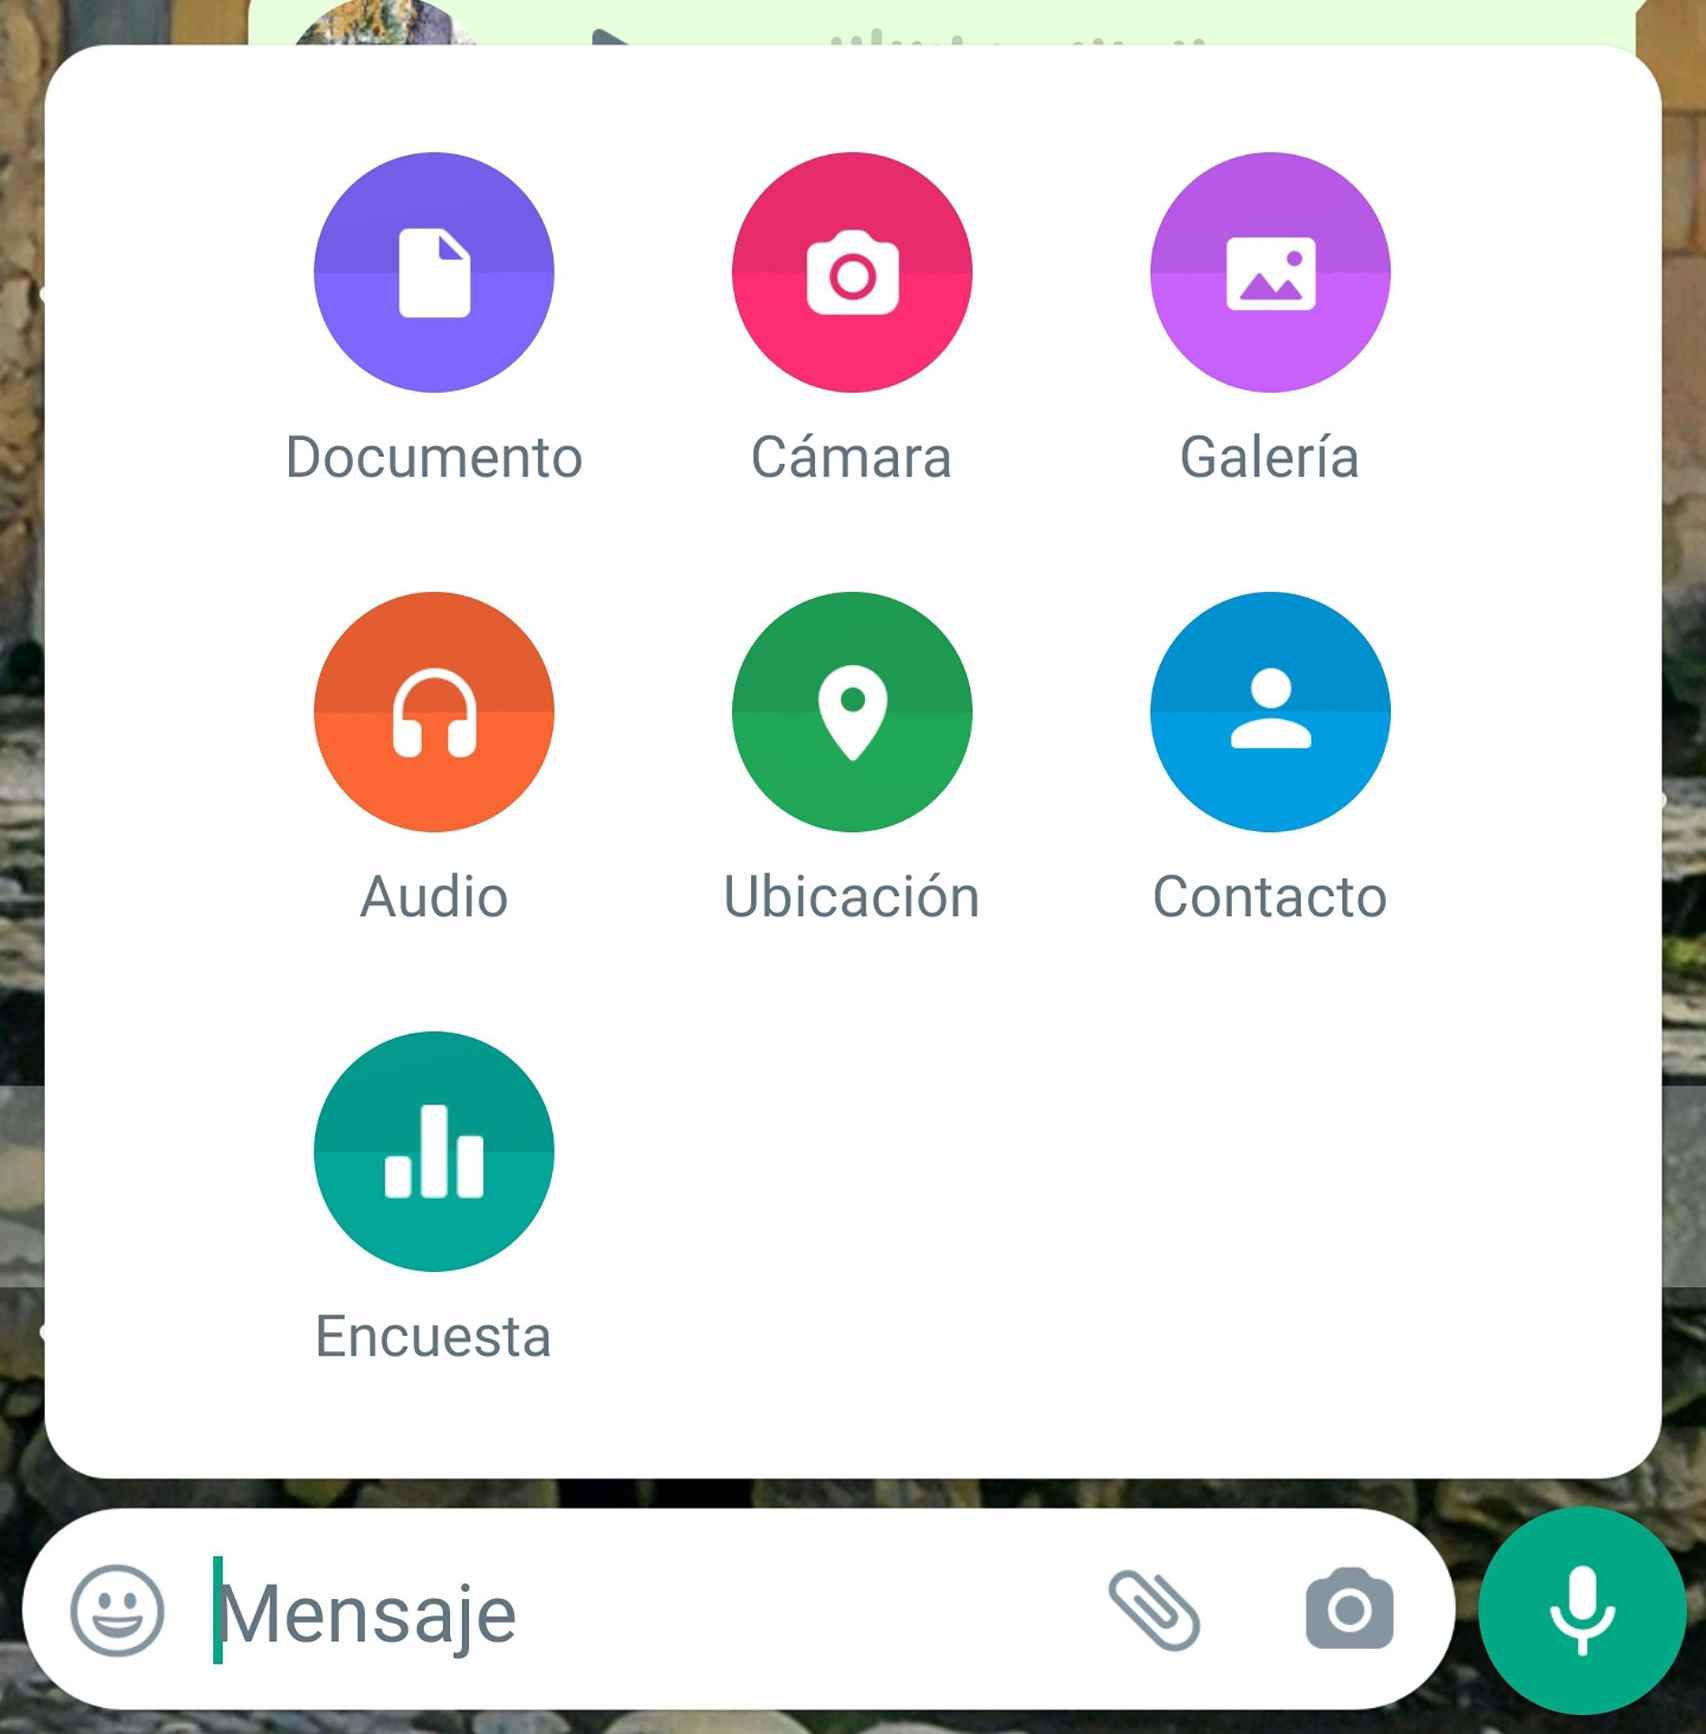 This is the current design of the share window in WhatsApp